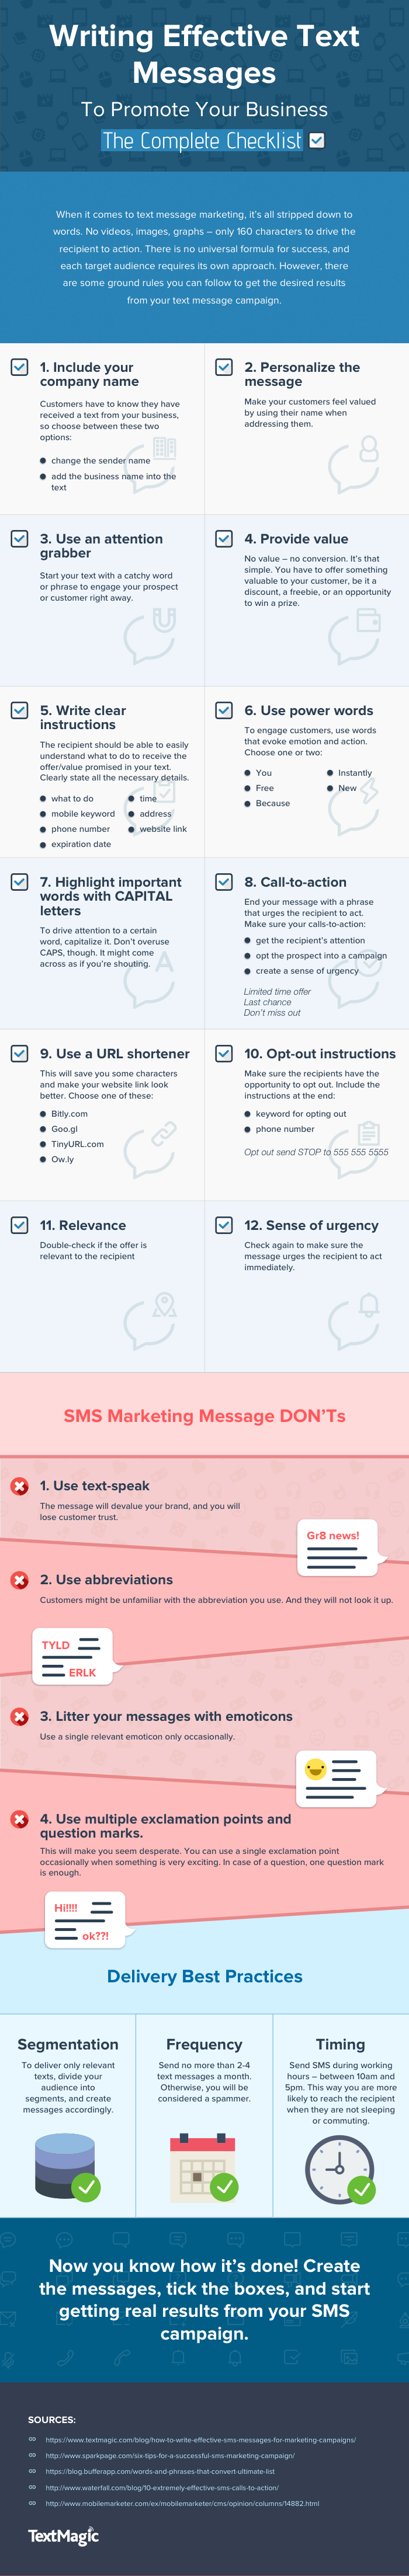 Checklist for Writing Business Texts [Infographic]